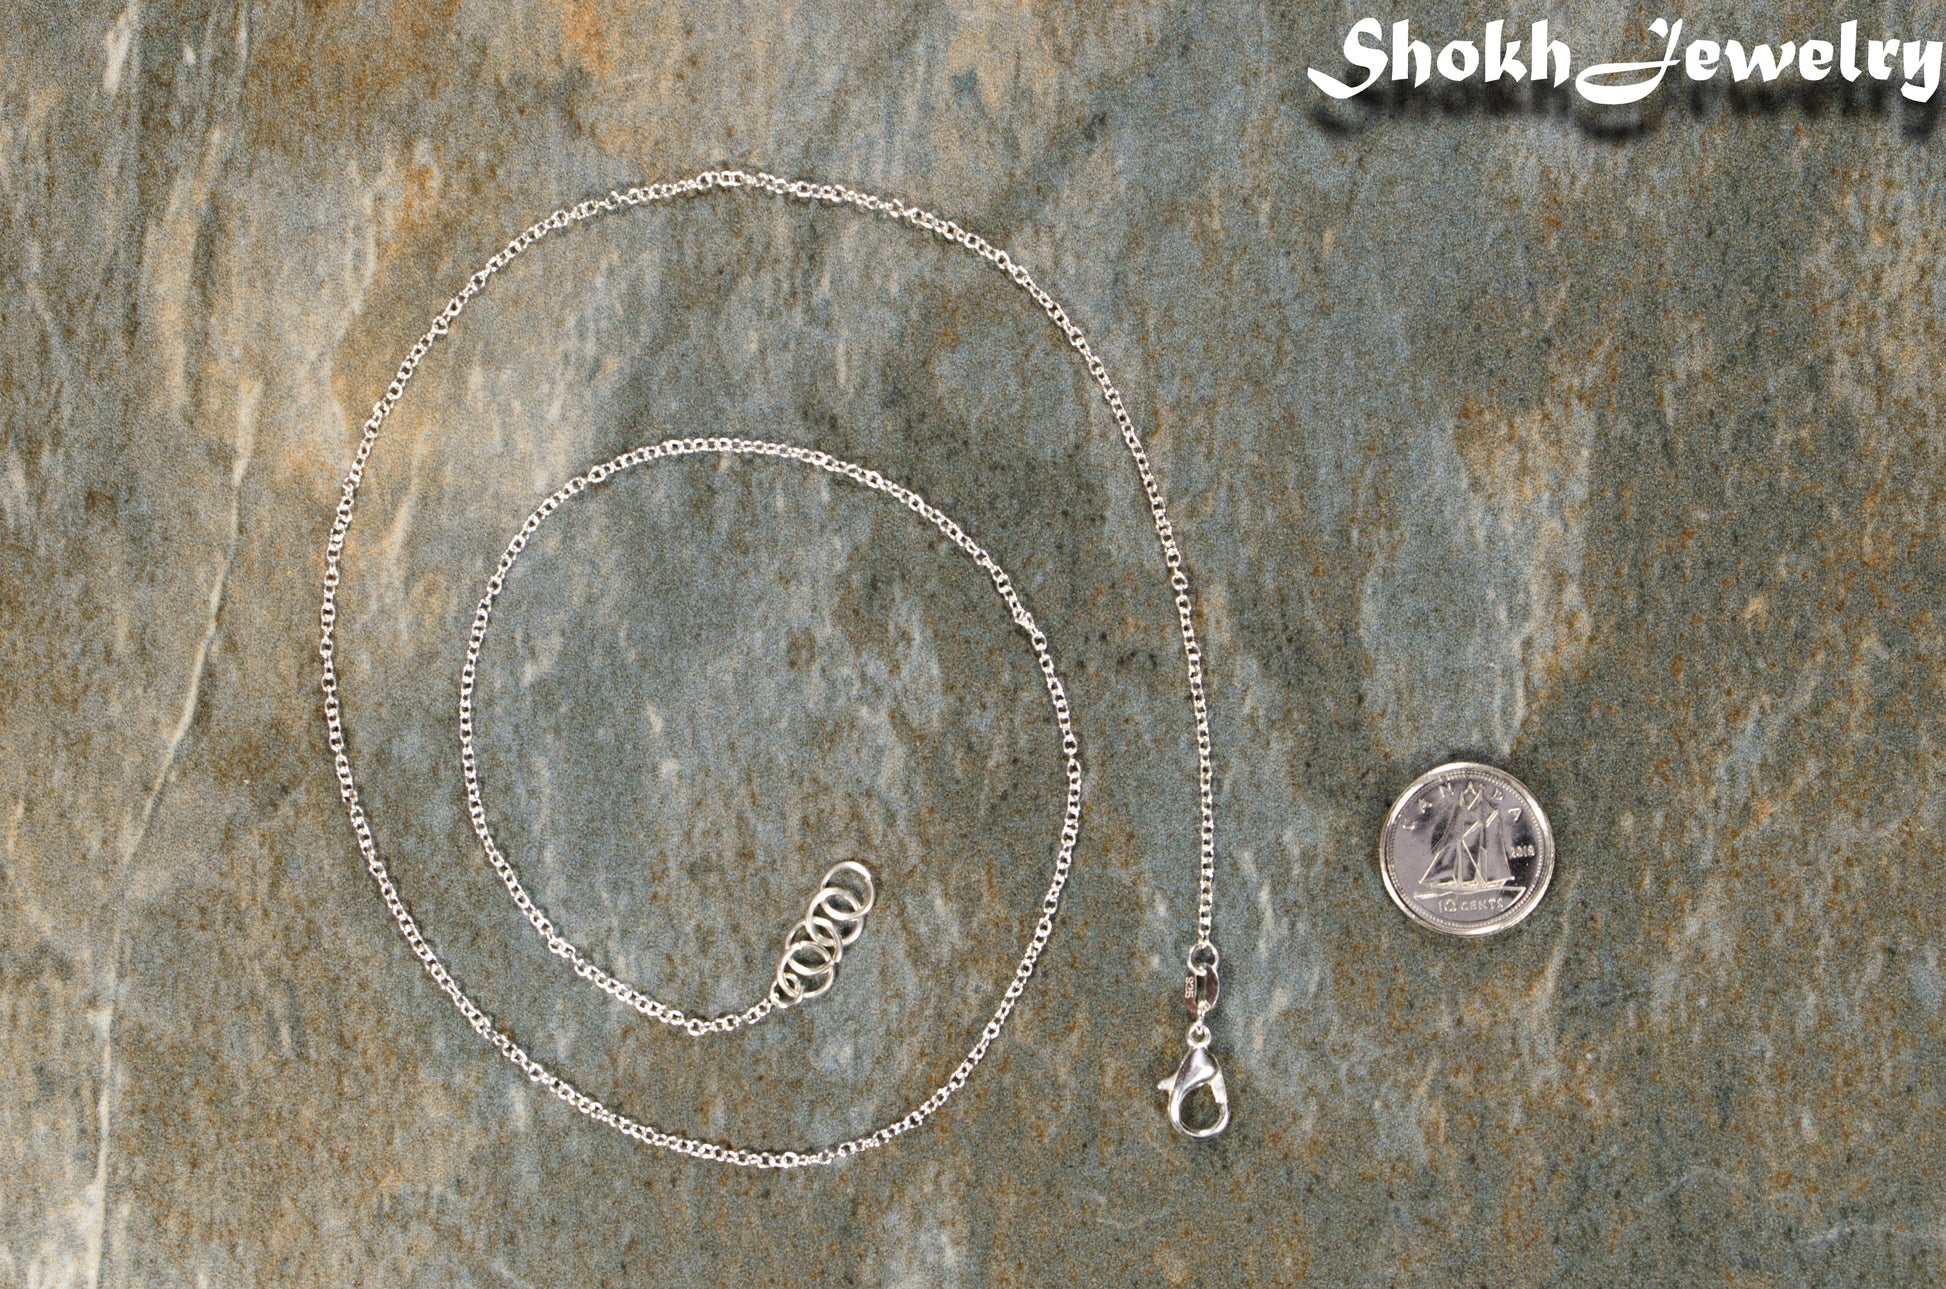 Silver Plated Dainty Chain Choker Necklace beside a dime.